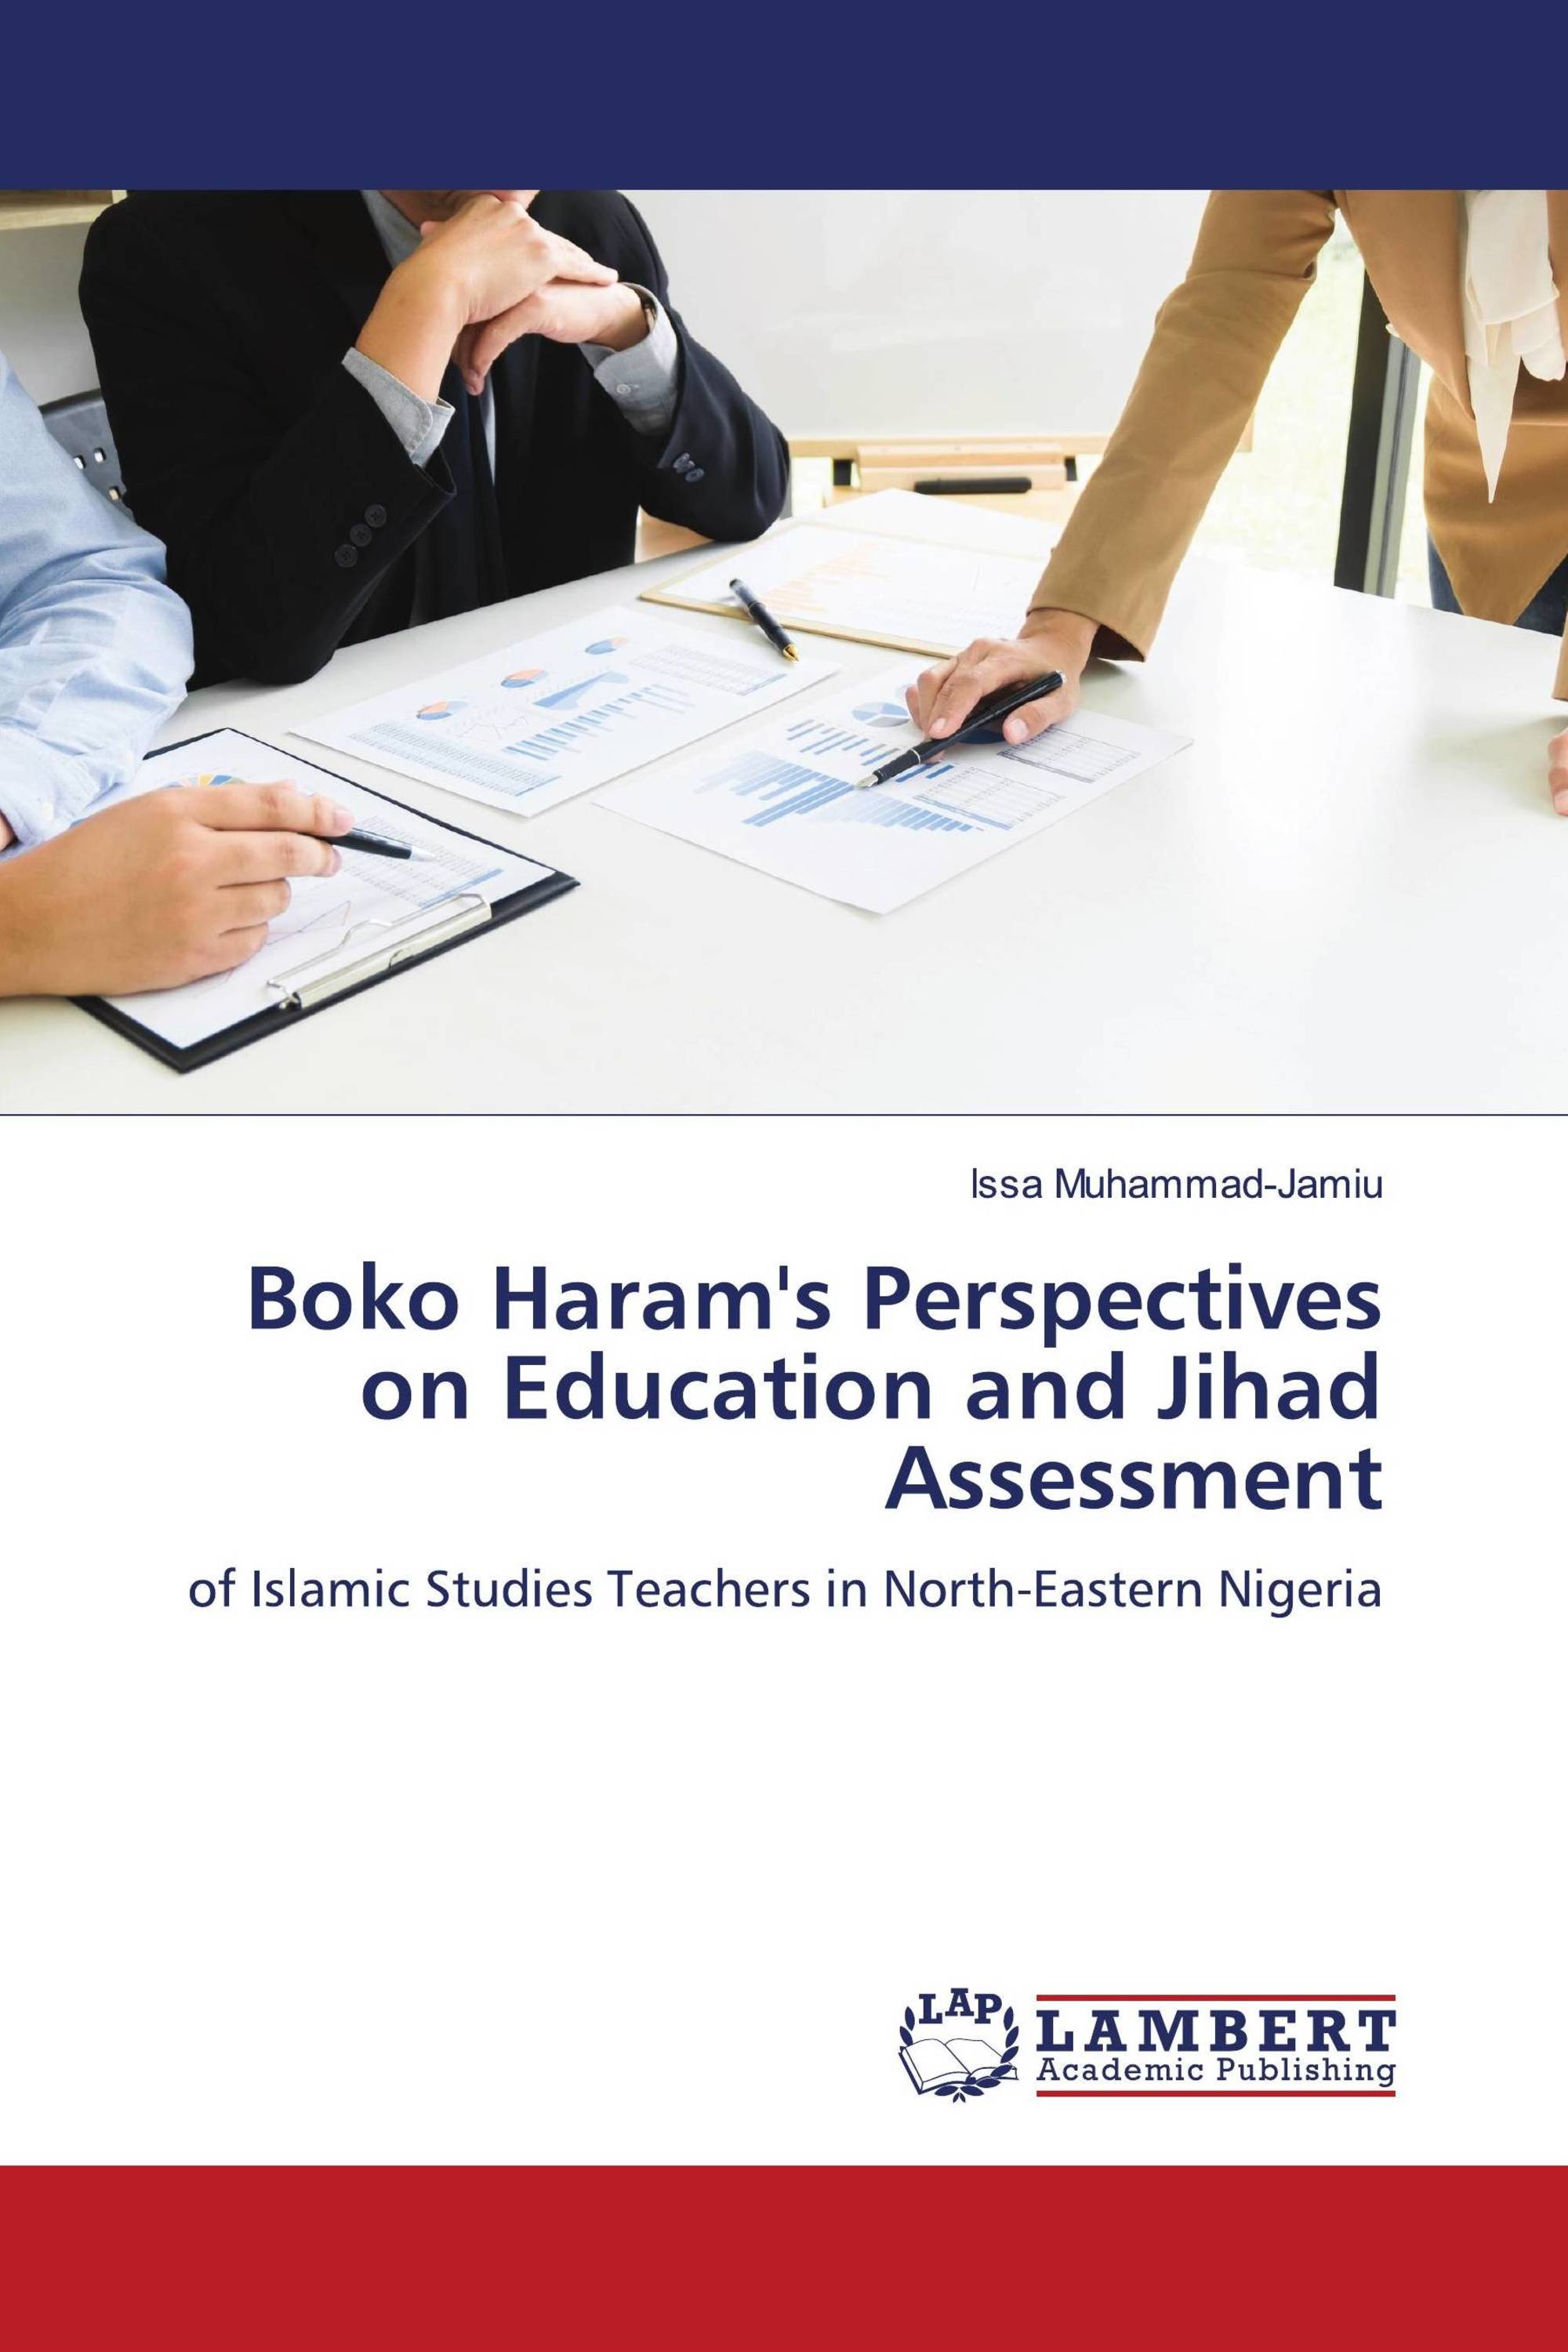 Boko Haram's Perspectives on Education and Jihad Assessment